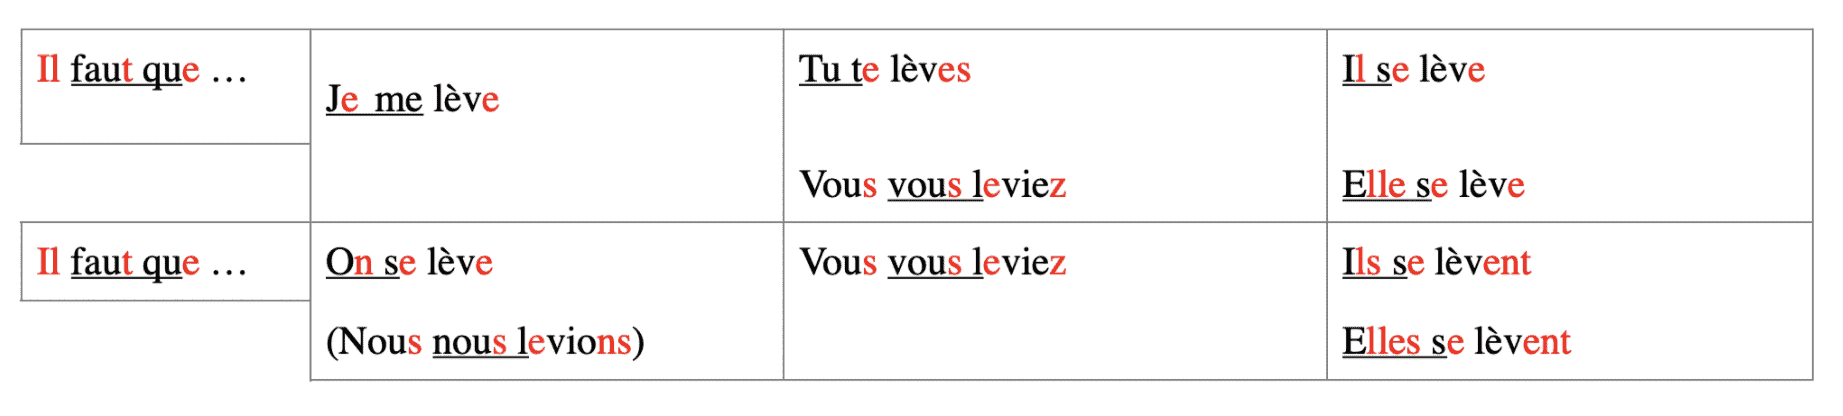 french verb tense practice